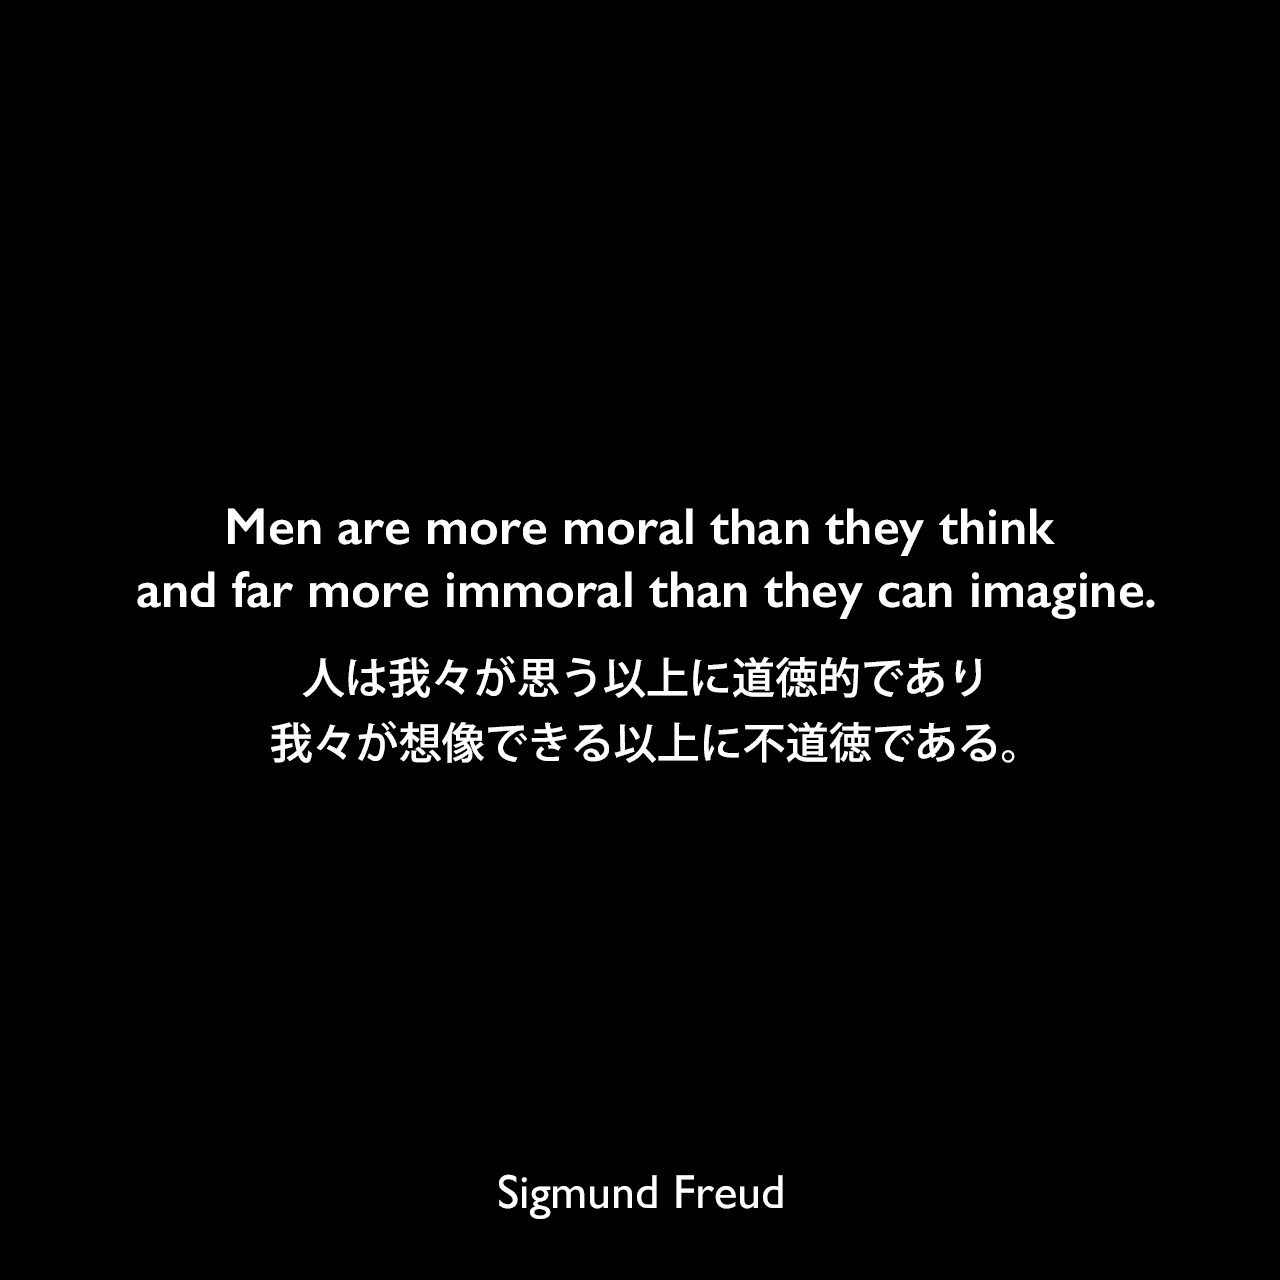 Men are more moral than they think and far more immoral than they can imagine.人は我々が思う以上に道徳的であり、我々が想像できる以上に不道徳である。